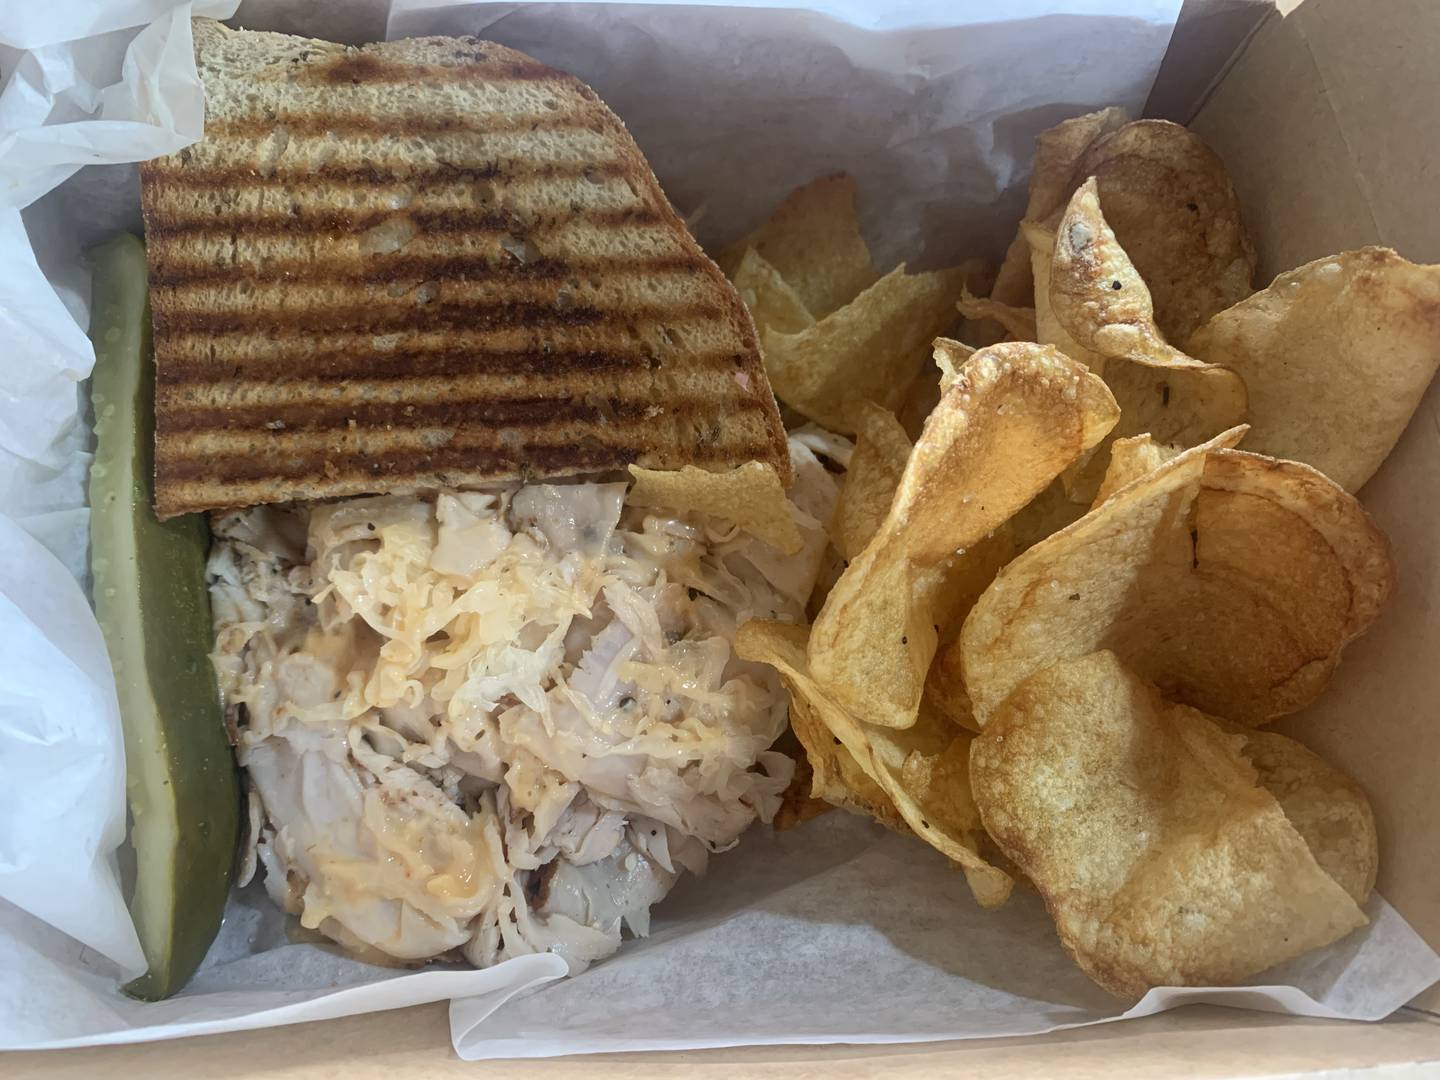 The Turkey Reuben at the Corned Beef Factory in Woodstock comes on a toasted rye bread with thousand island dressing, sauerkraut and Swiss cheese.